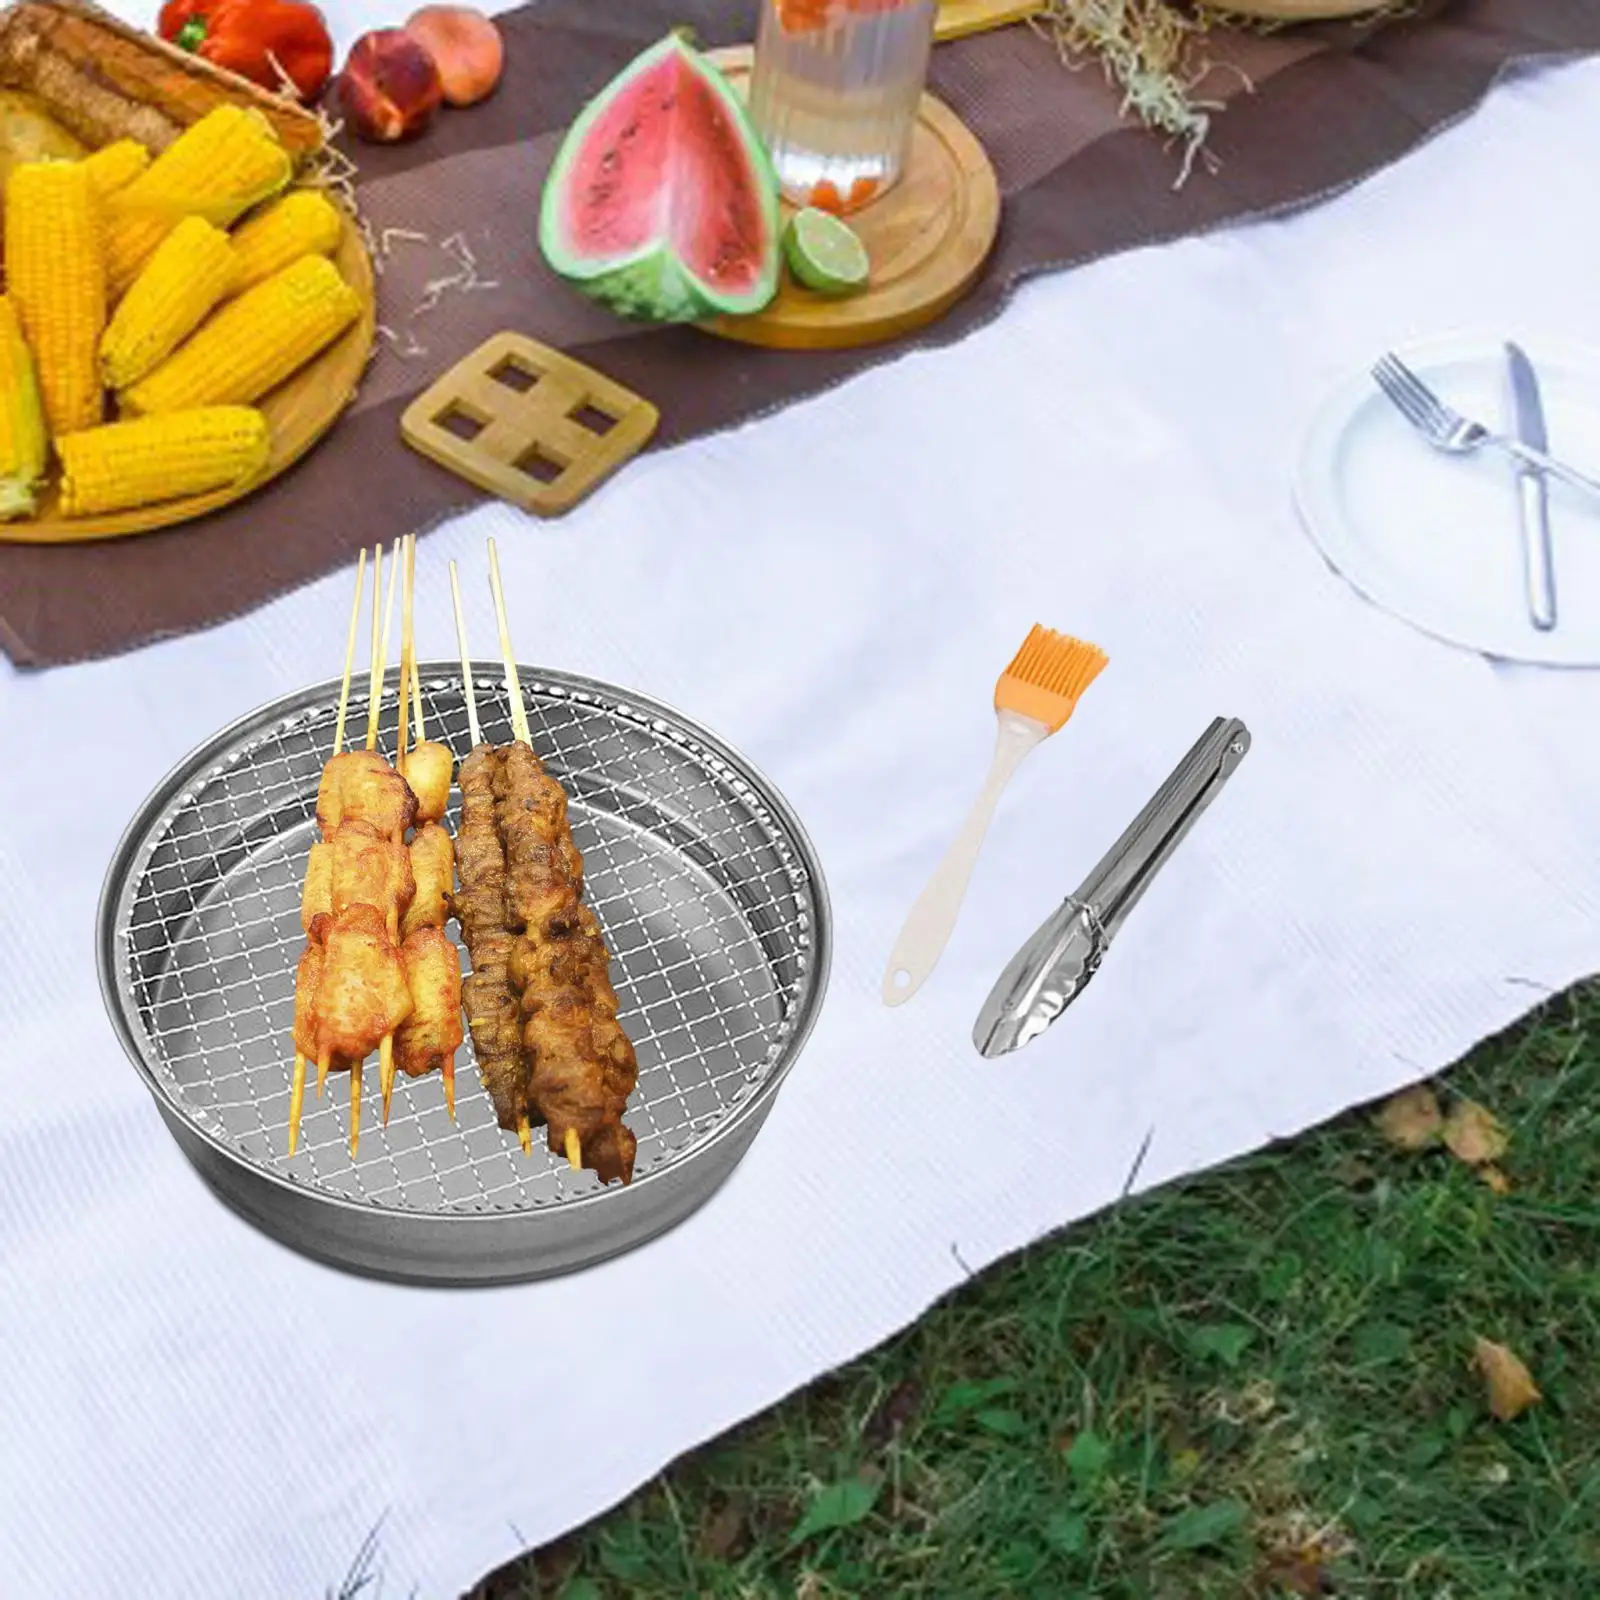 Disposable Charcoal Grill Portable Stainless Steel Baking Tray with Brush and Tongs for Cooking Patio Backpacking Hiking